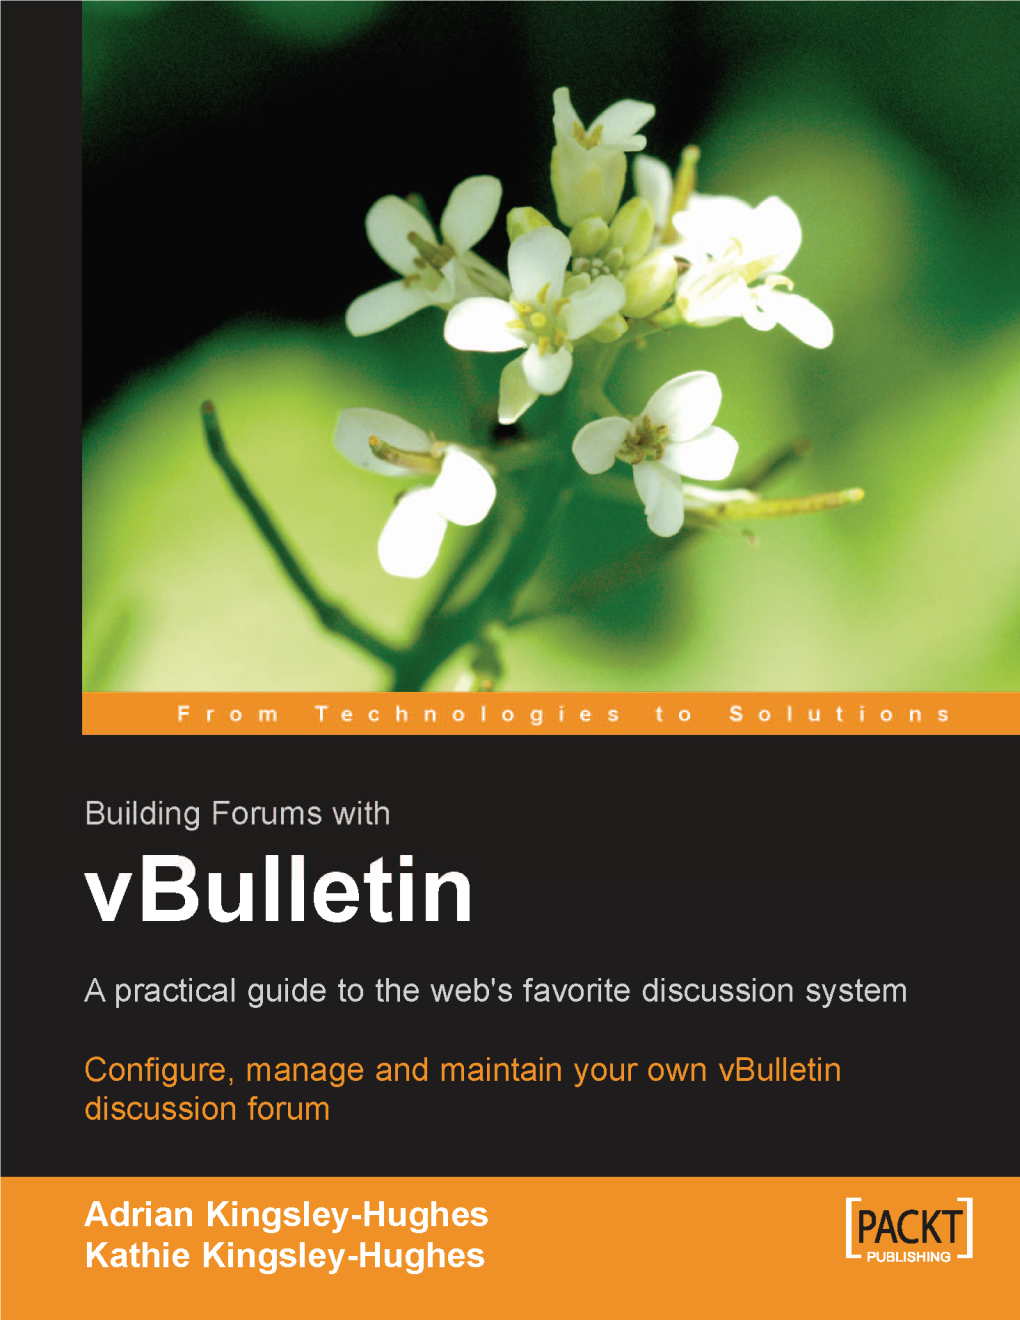 Building Forums with Vbulletin Creating and Maintaining Online Discussion Forums